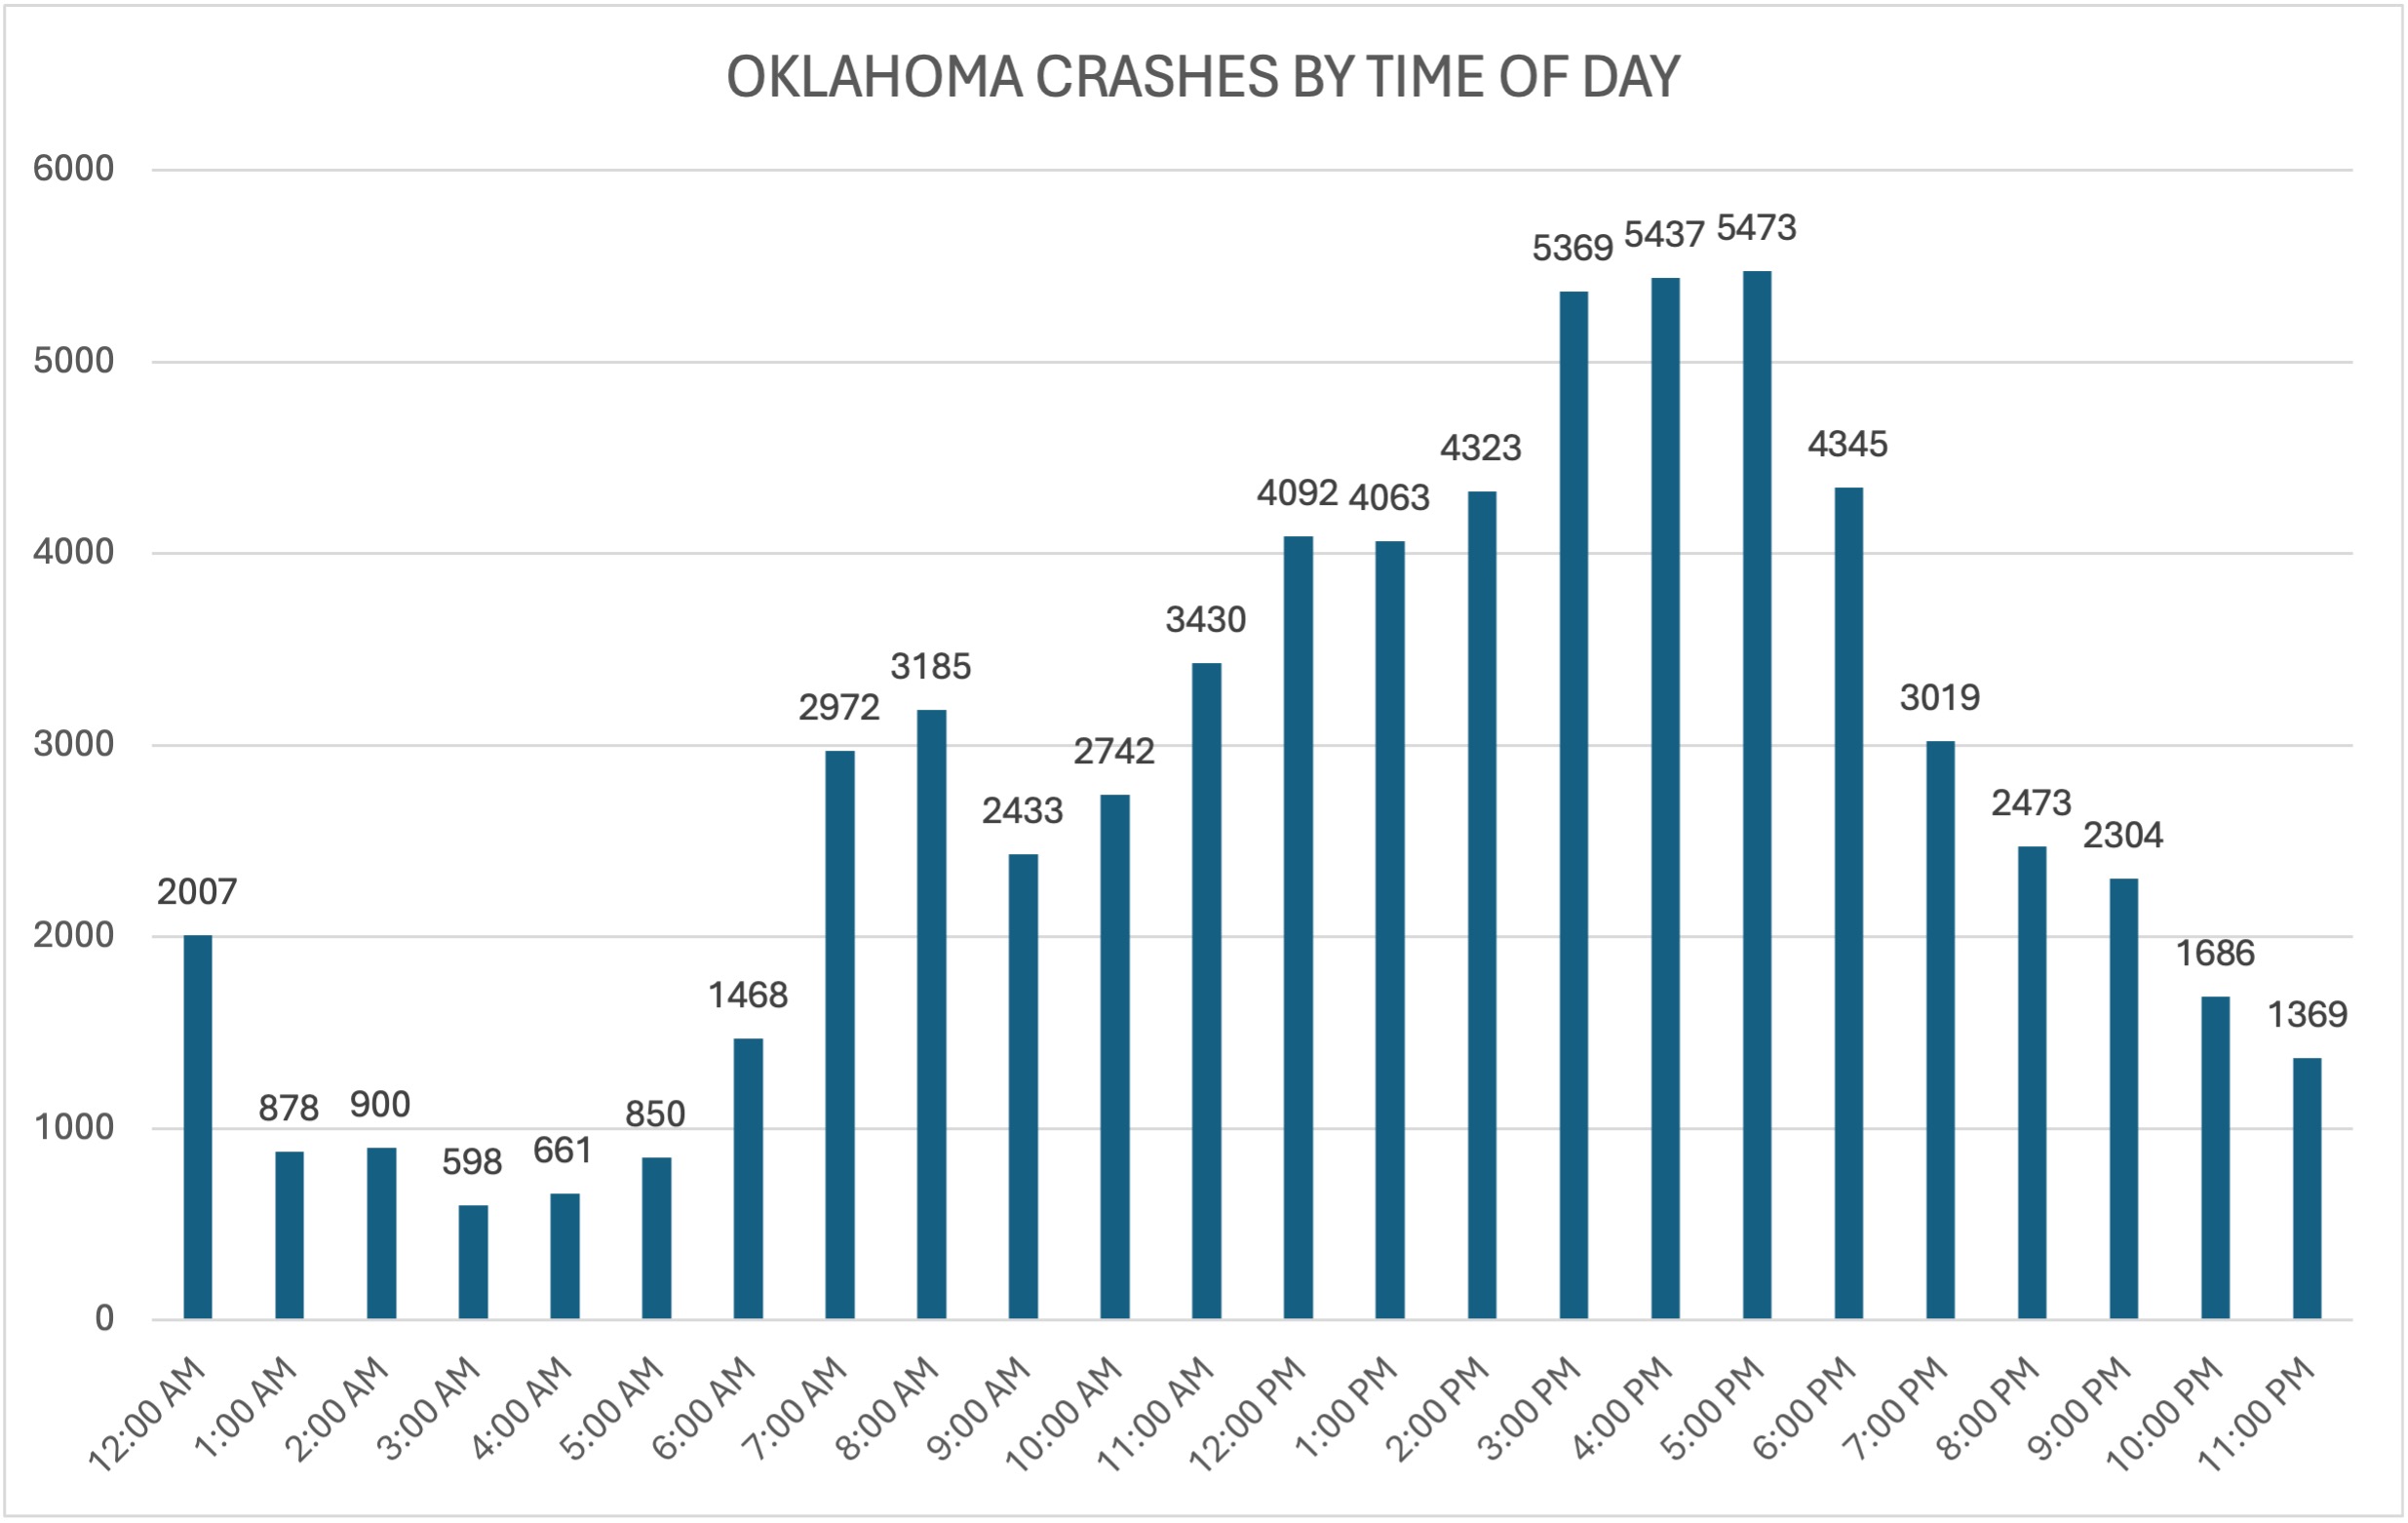 Oklahoma crashes by time of day graph